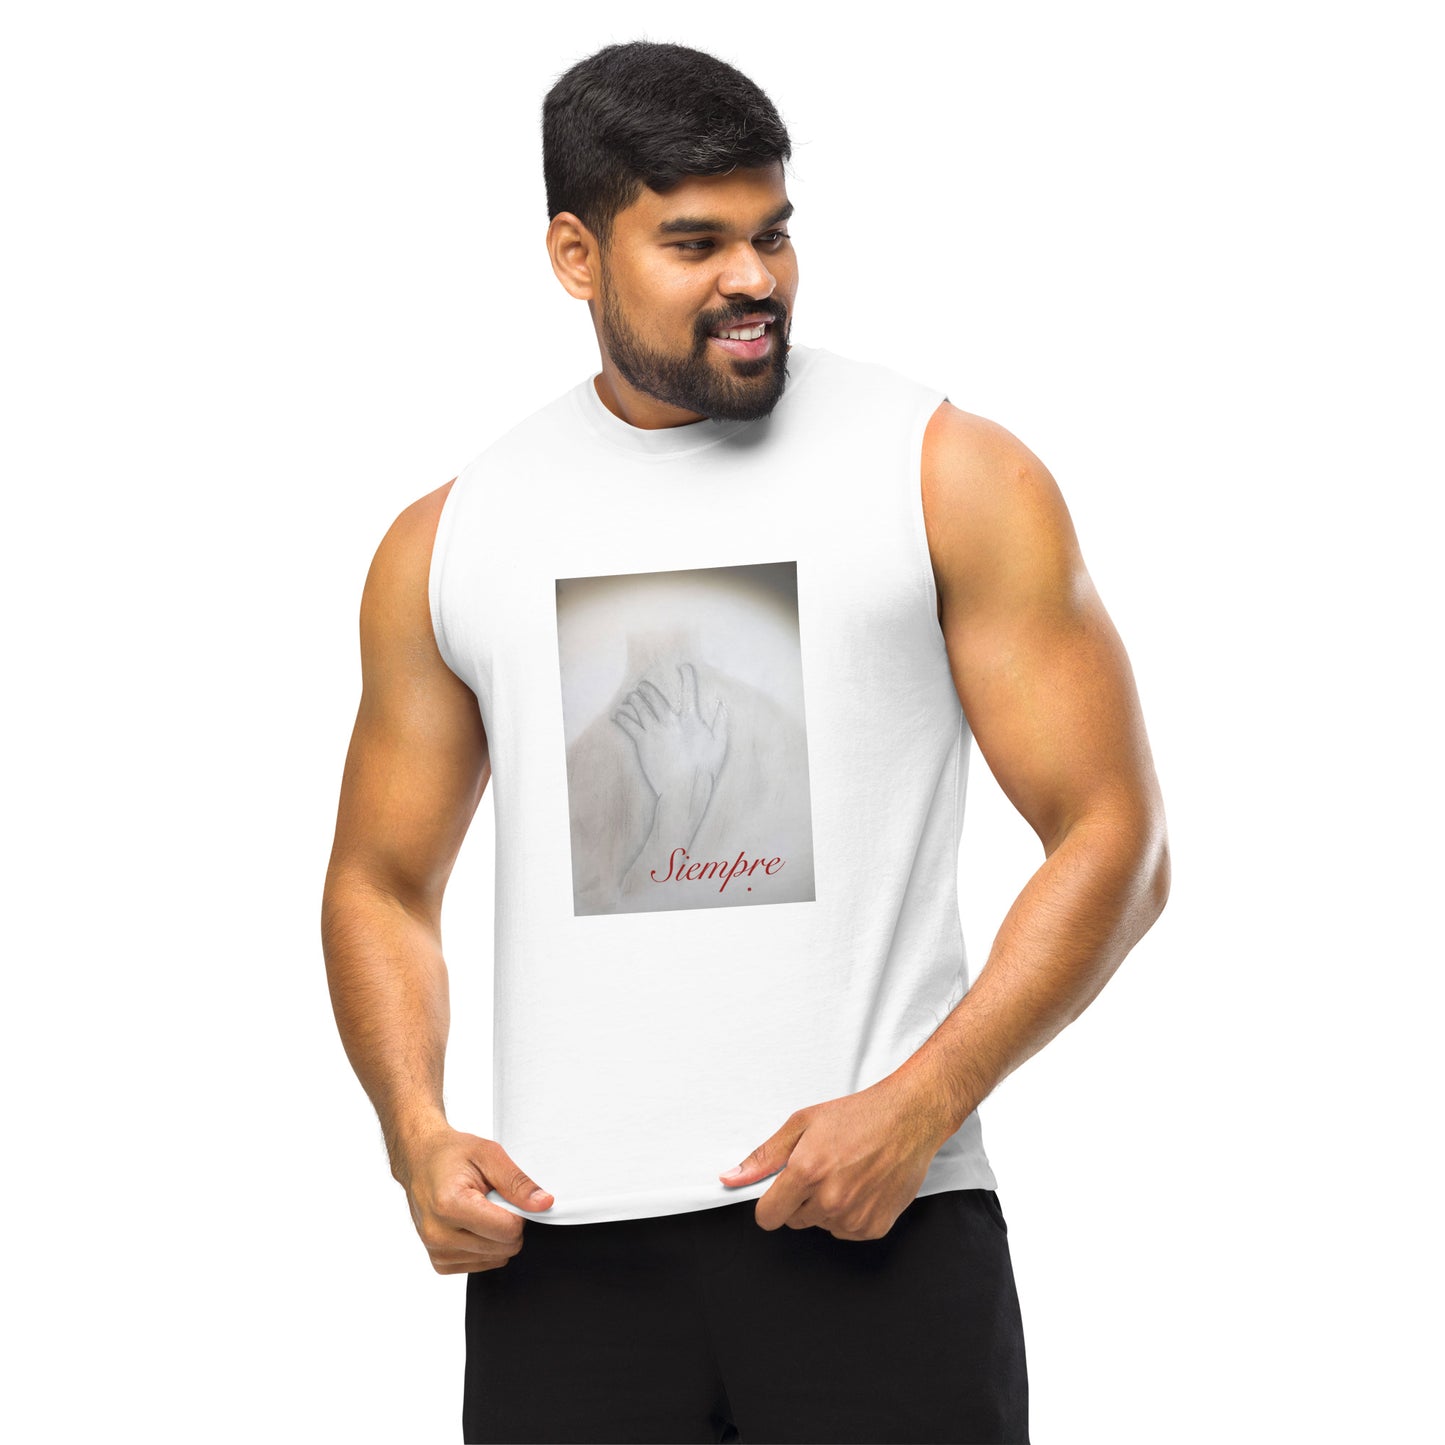 “Forever” Muscle Shirt